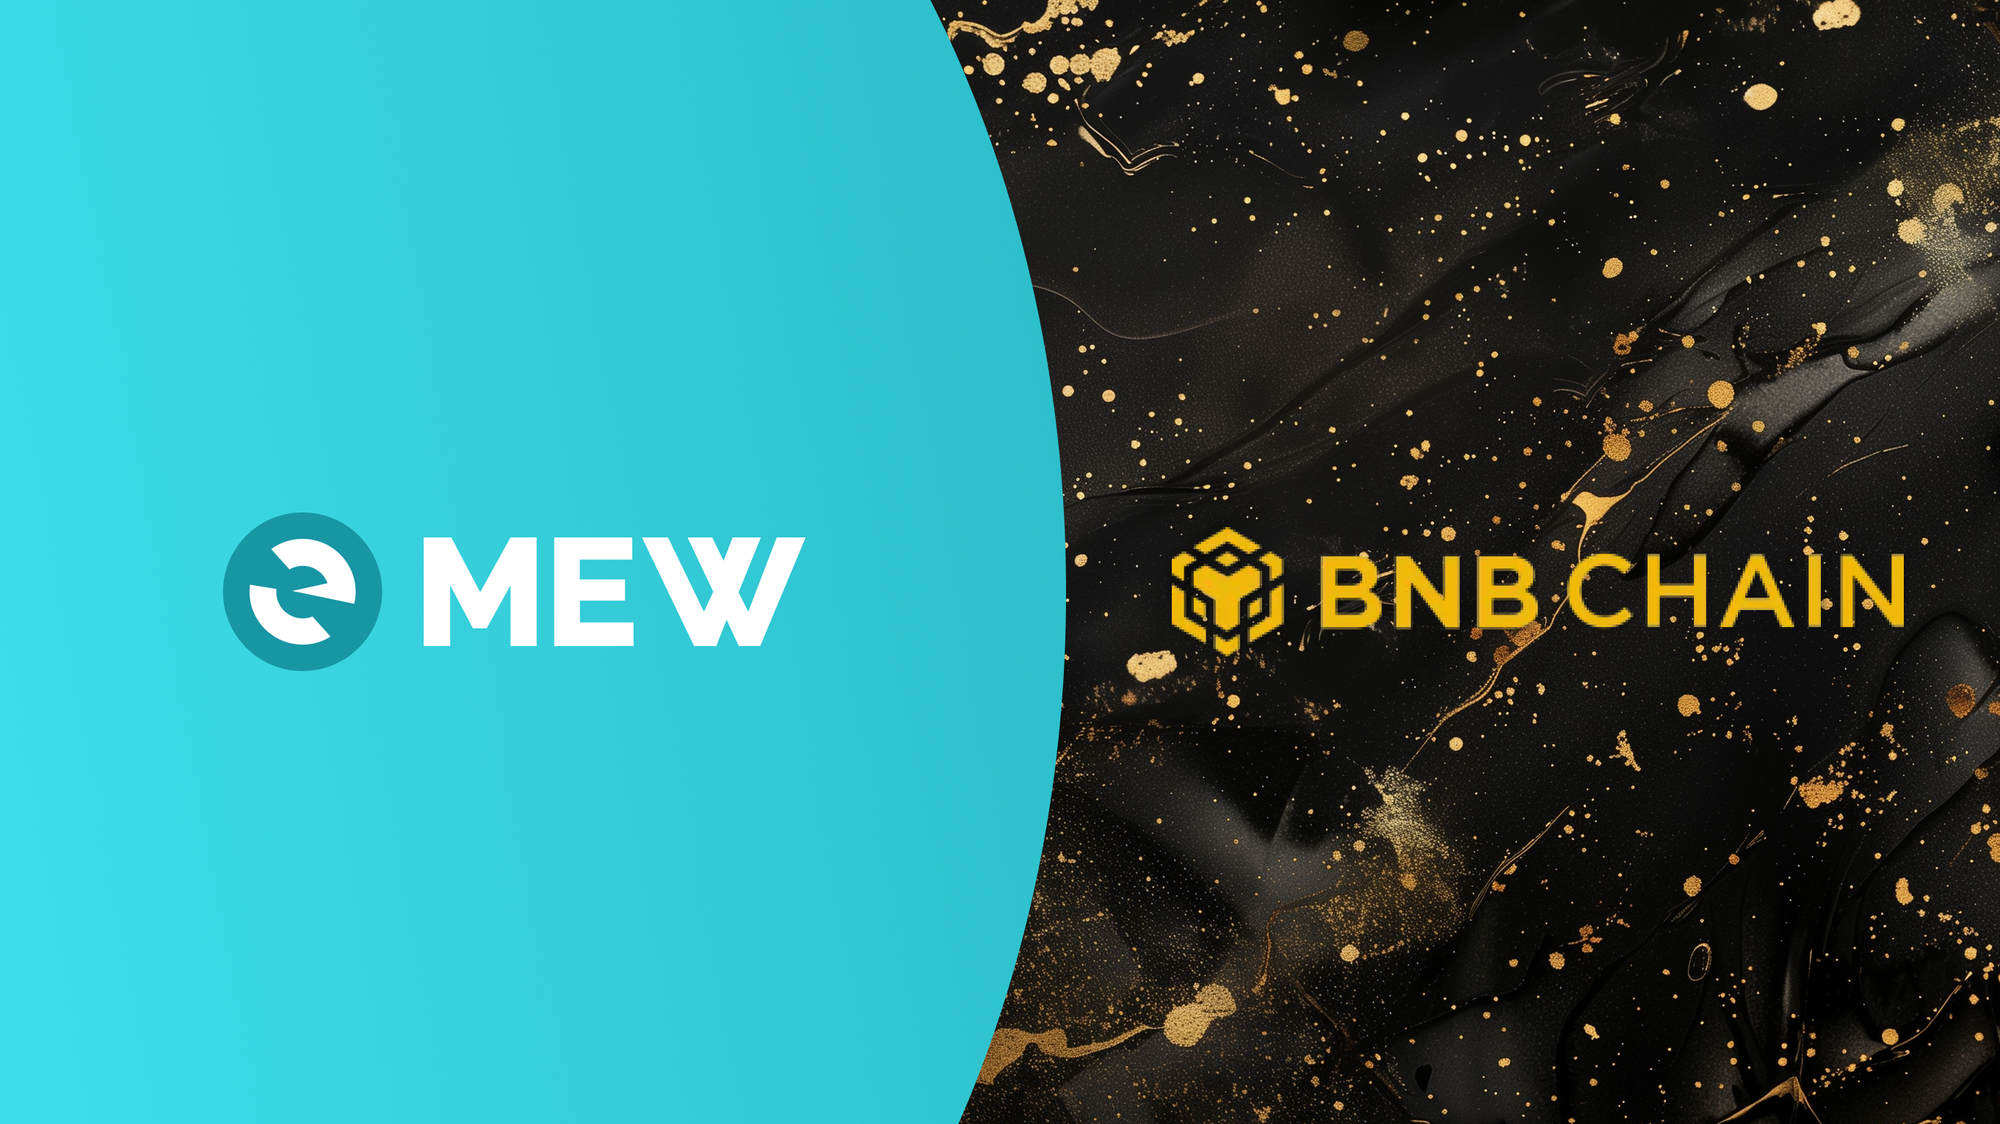 Swapping on BNB Smart Chain with MEW Mobile